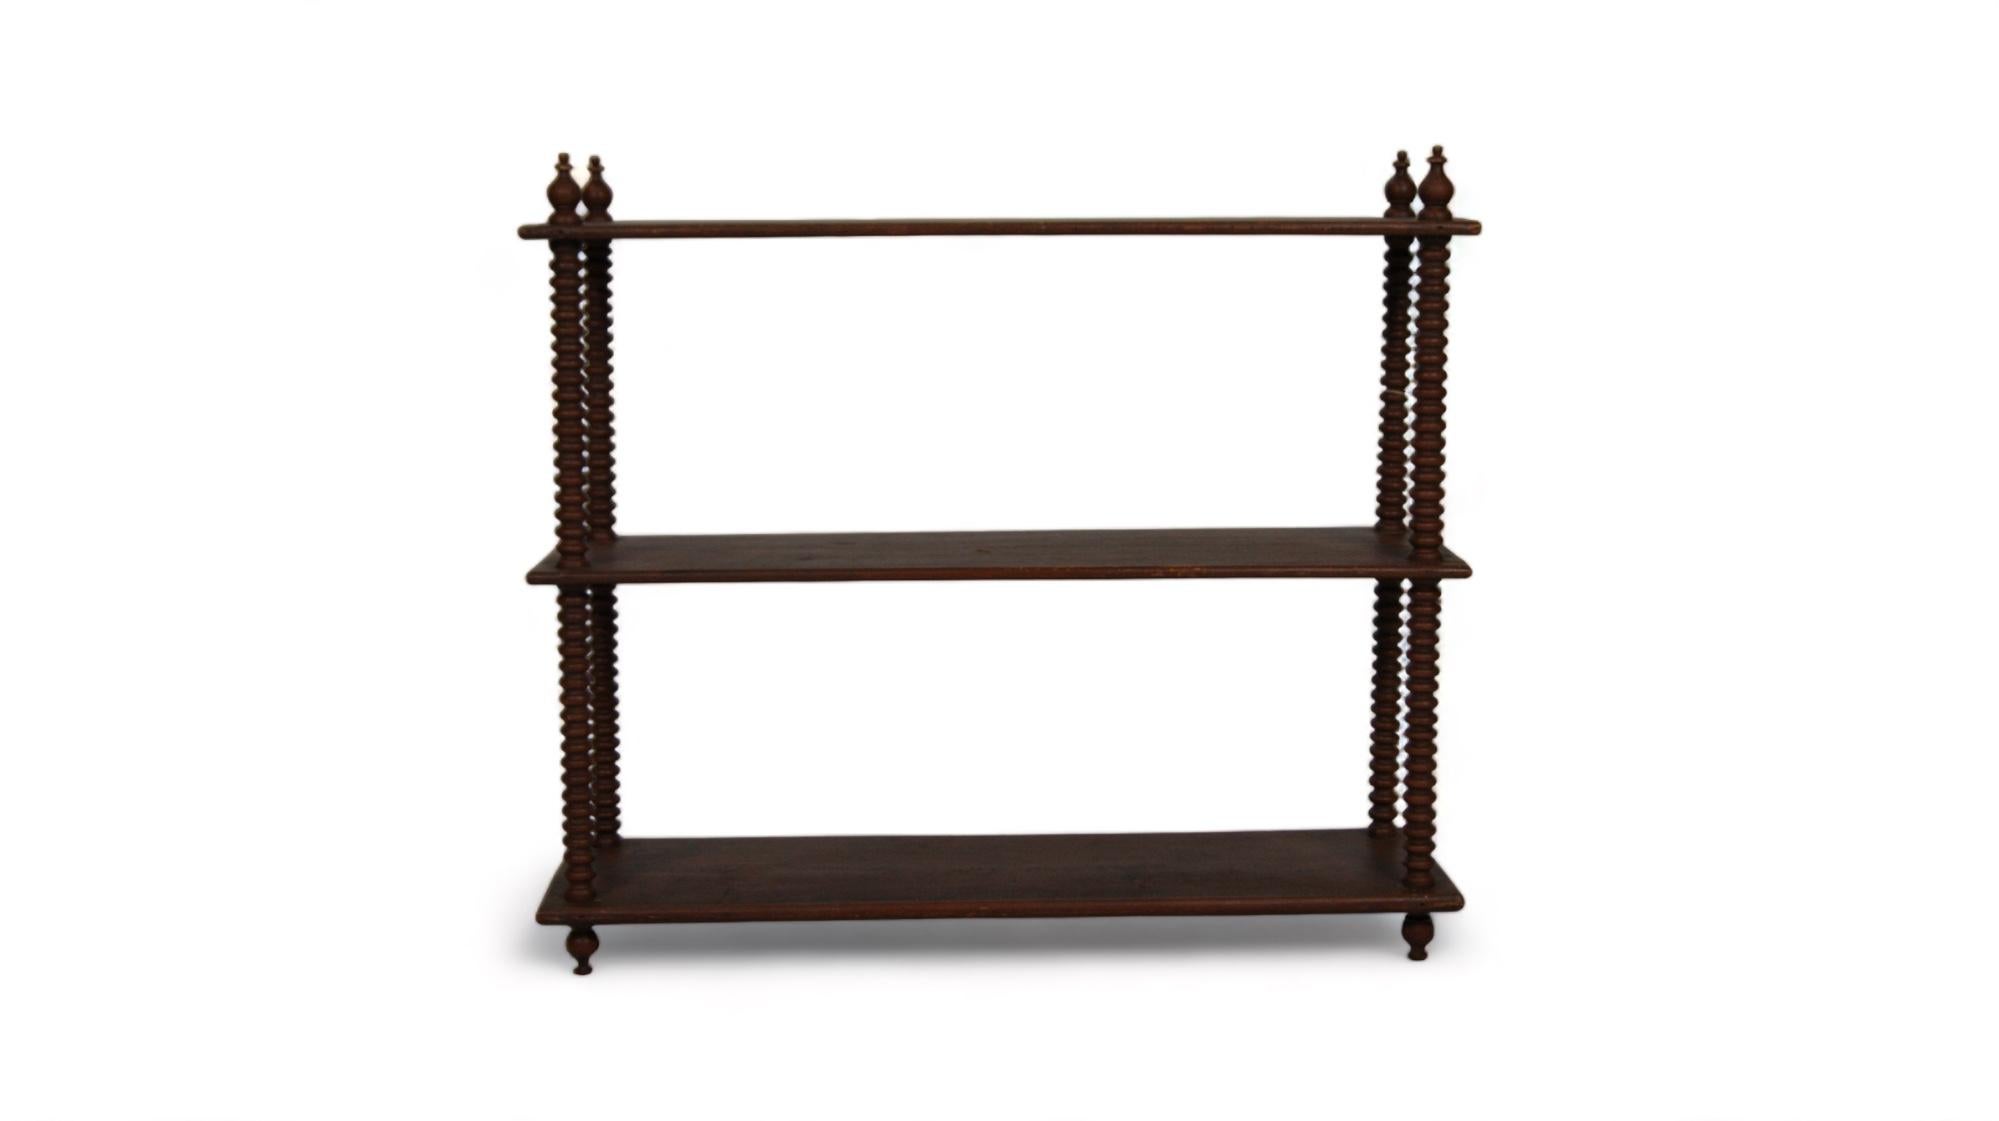 The antique French walnut shelf is a sublime piece that embodies the essence of refinement and classic elegance. With its distinctive design and rich history, this bookcase stands as a masterpiece of exquisite craftsmanship and taste.

Walnut, with